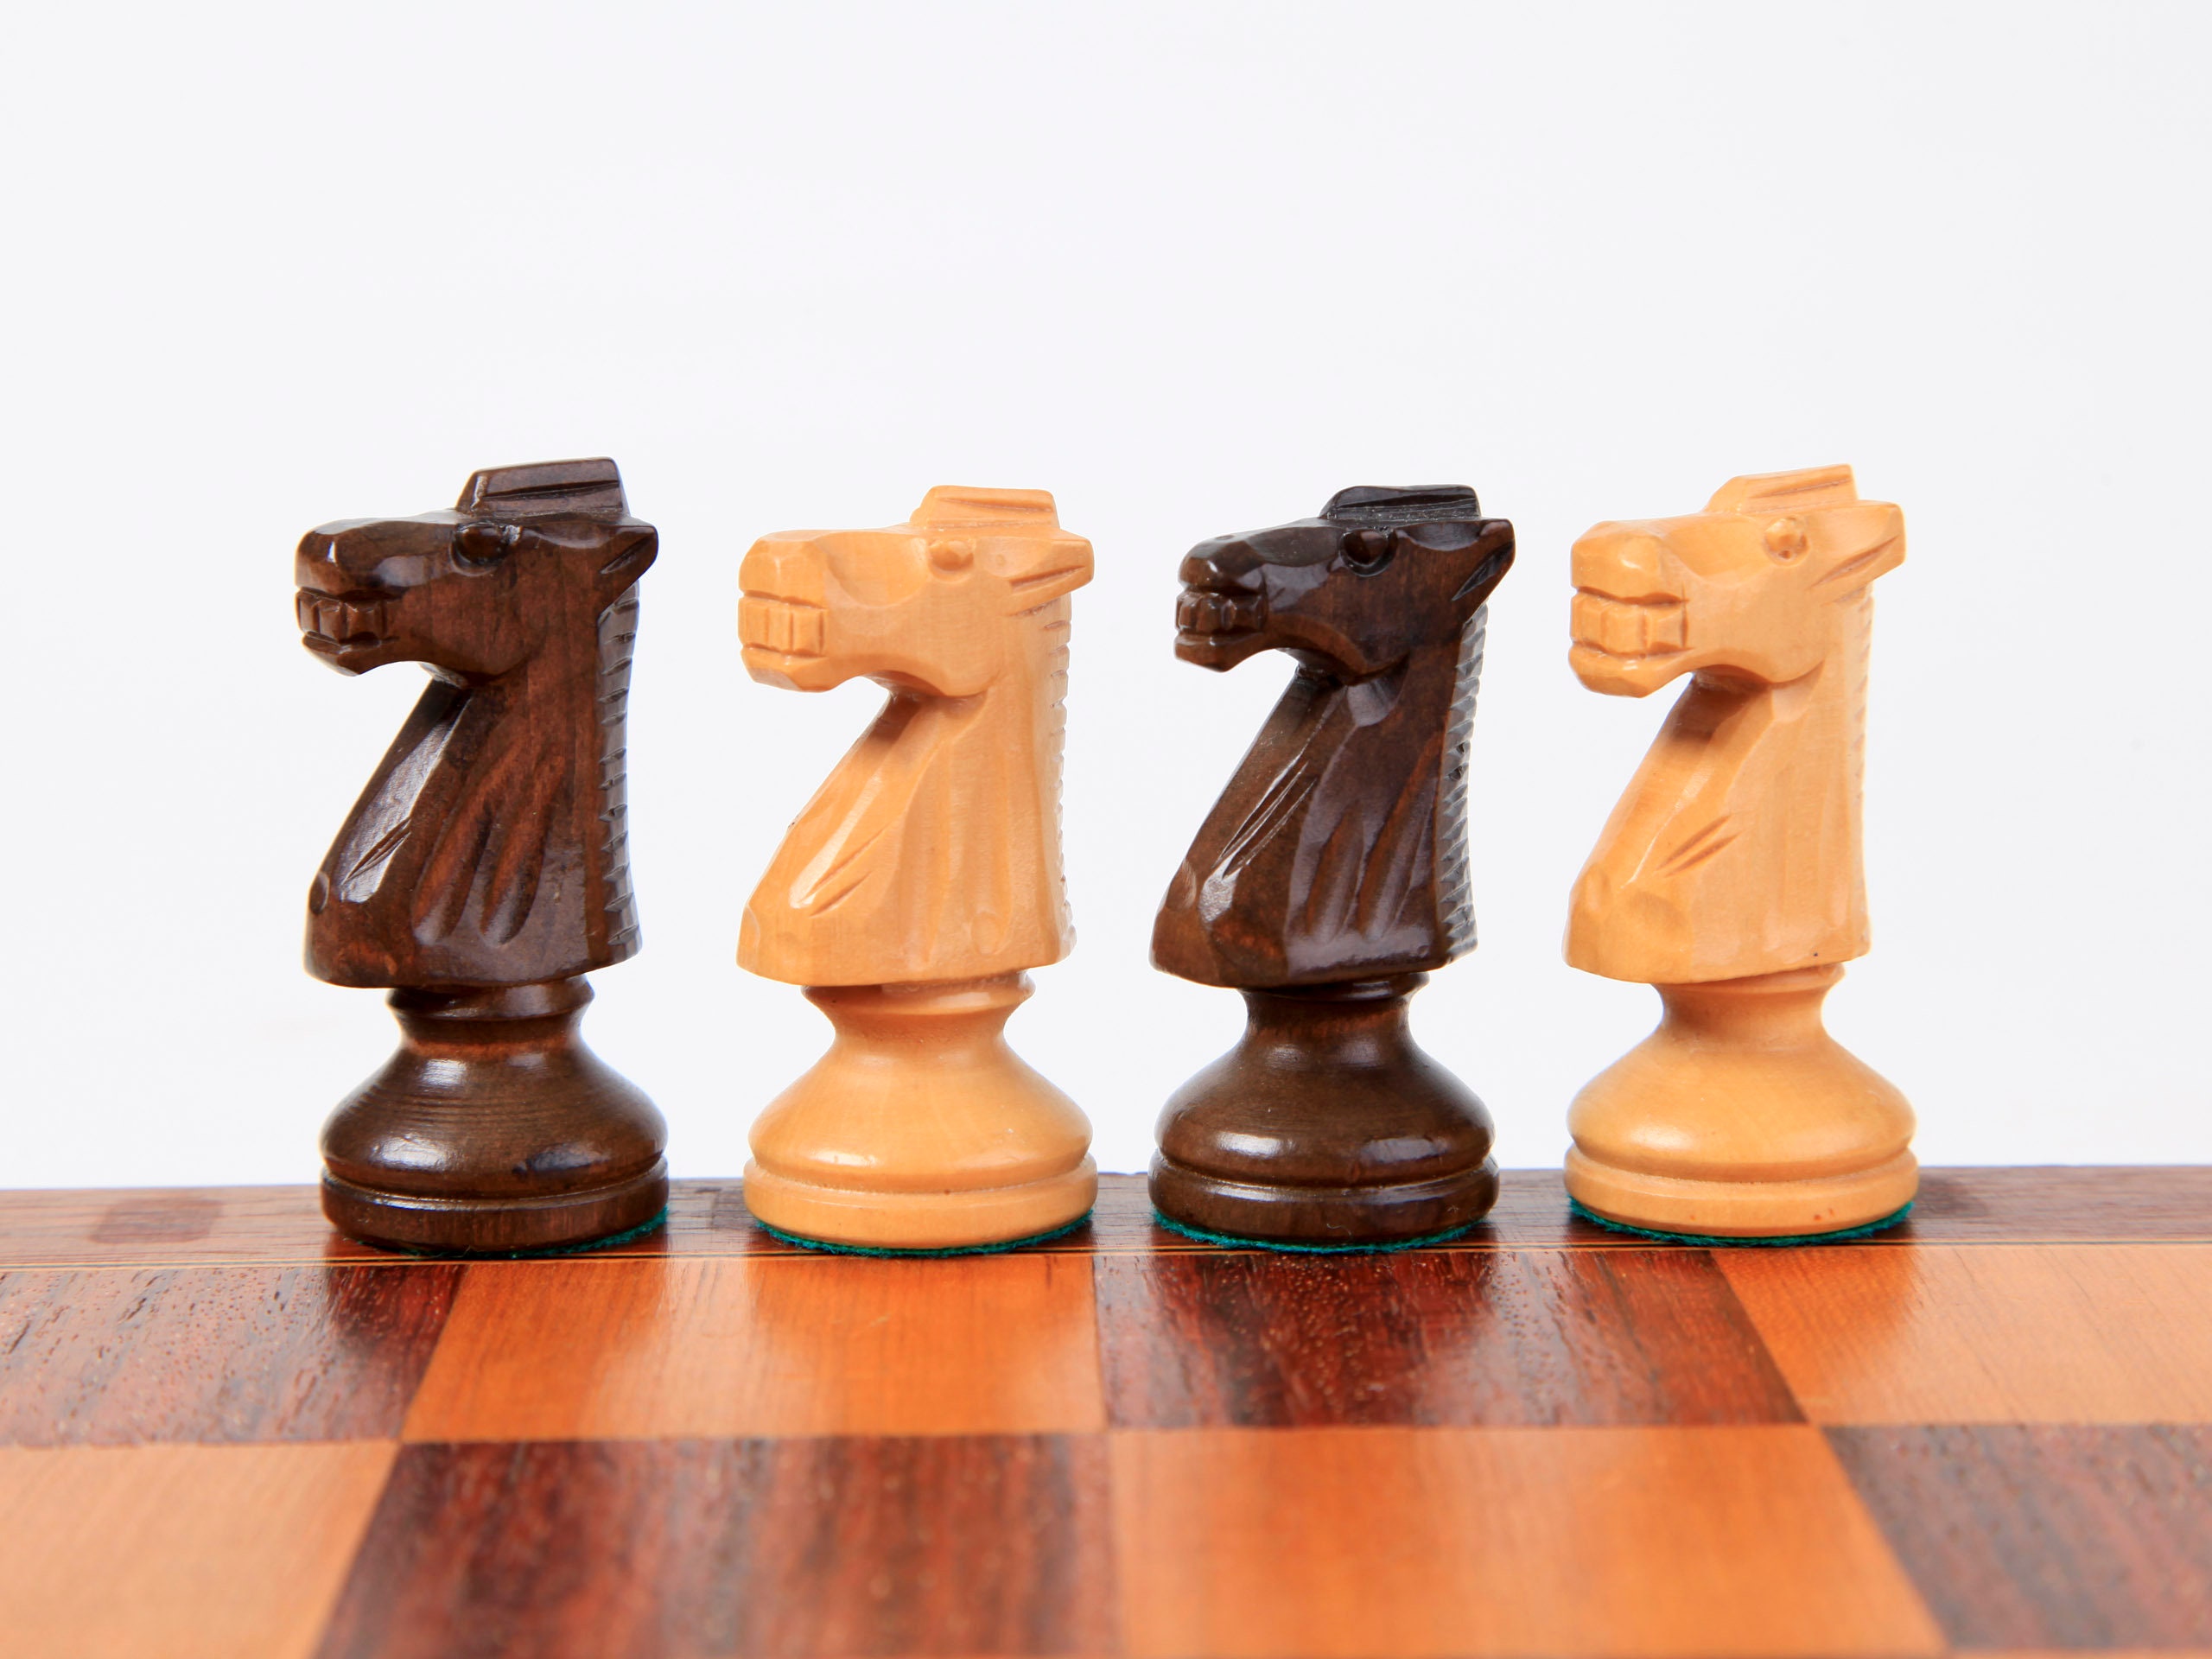 Vintage Weighted Staunton Chess Set KH 95 cm/375 in. -  Portugal